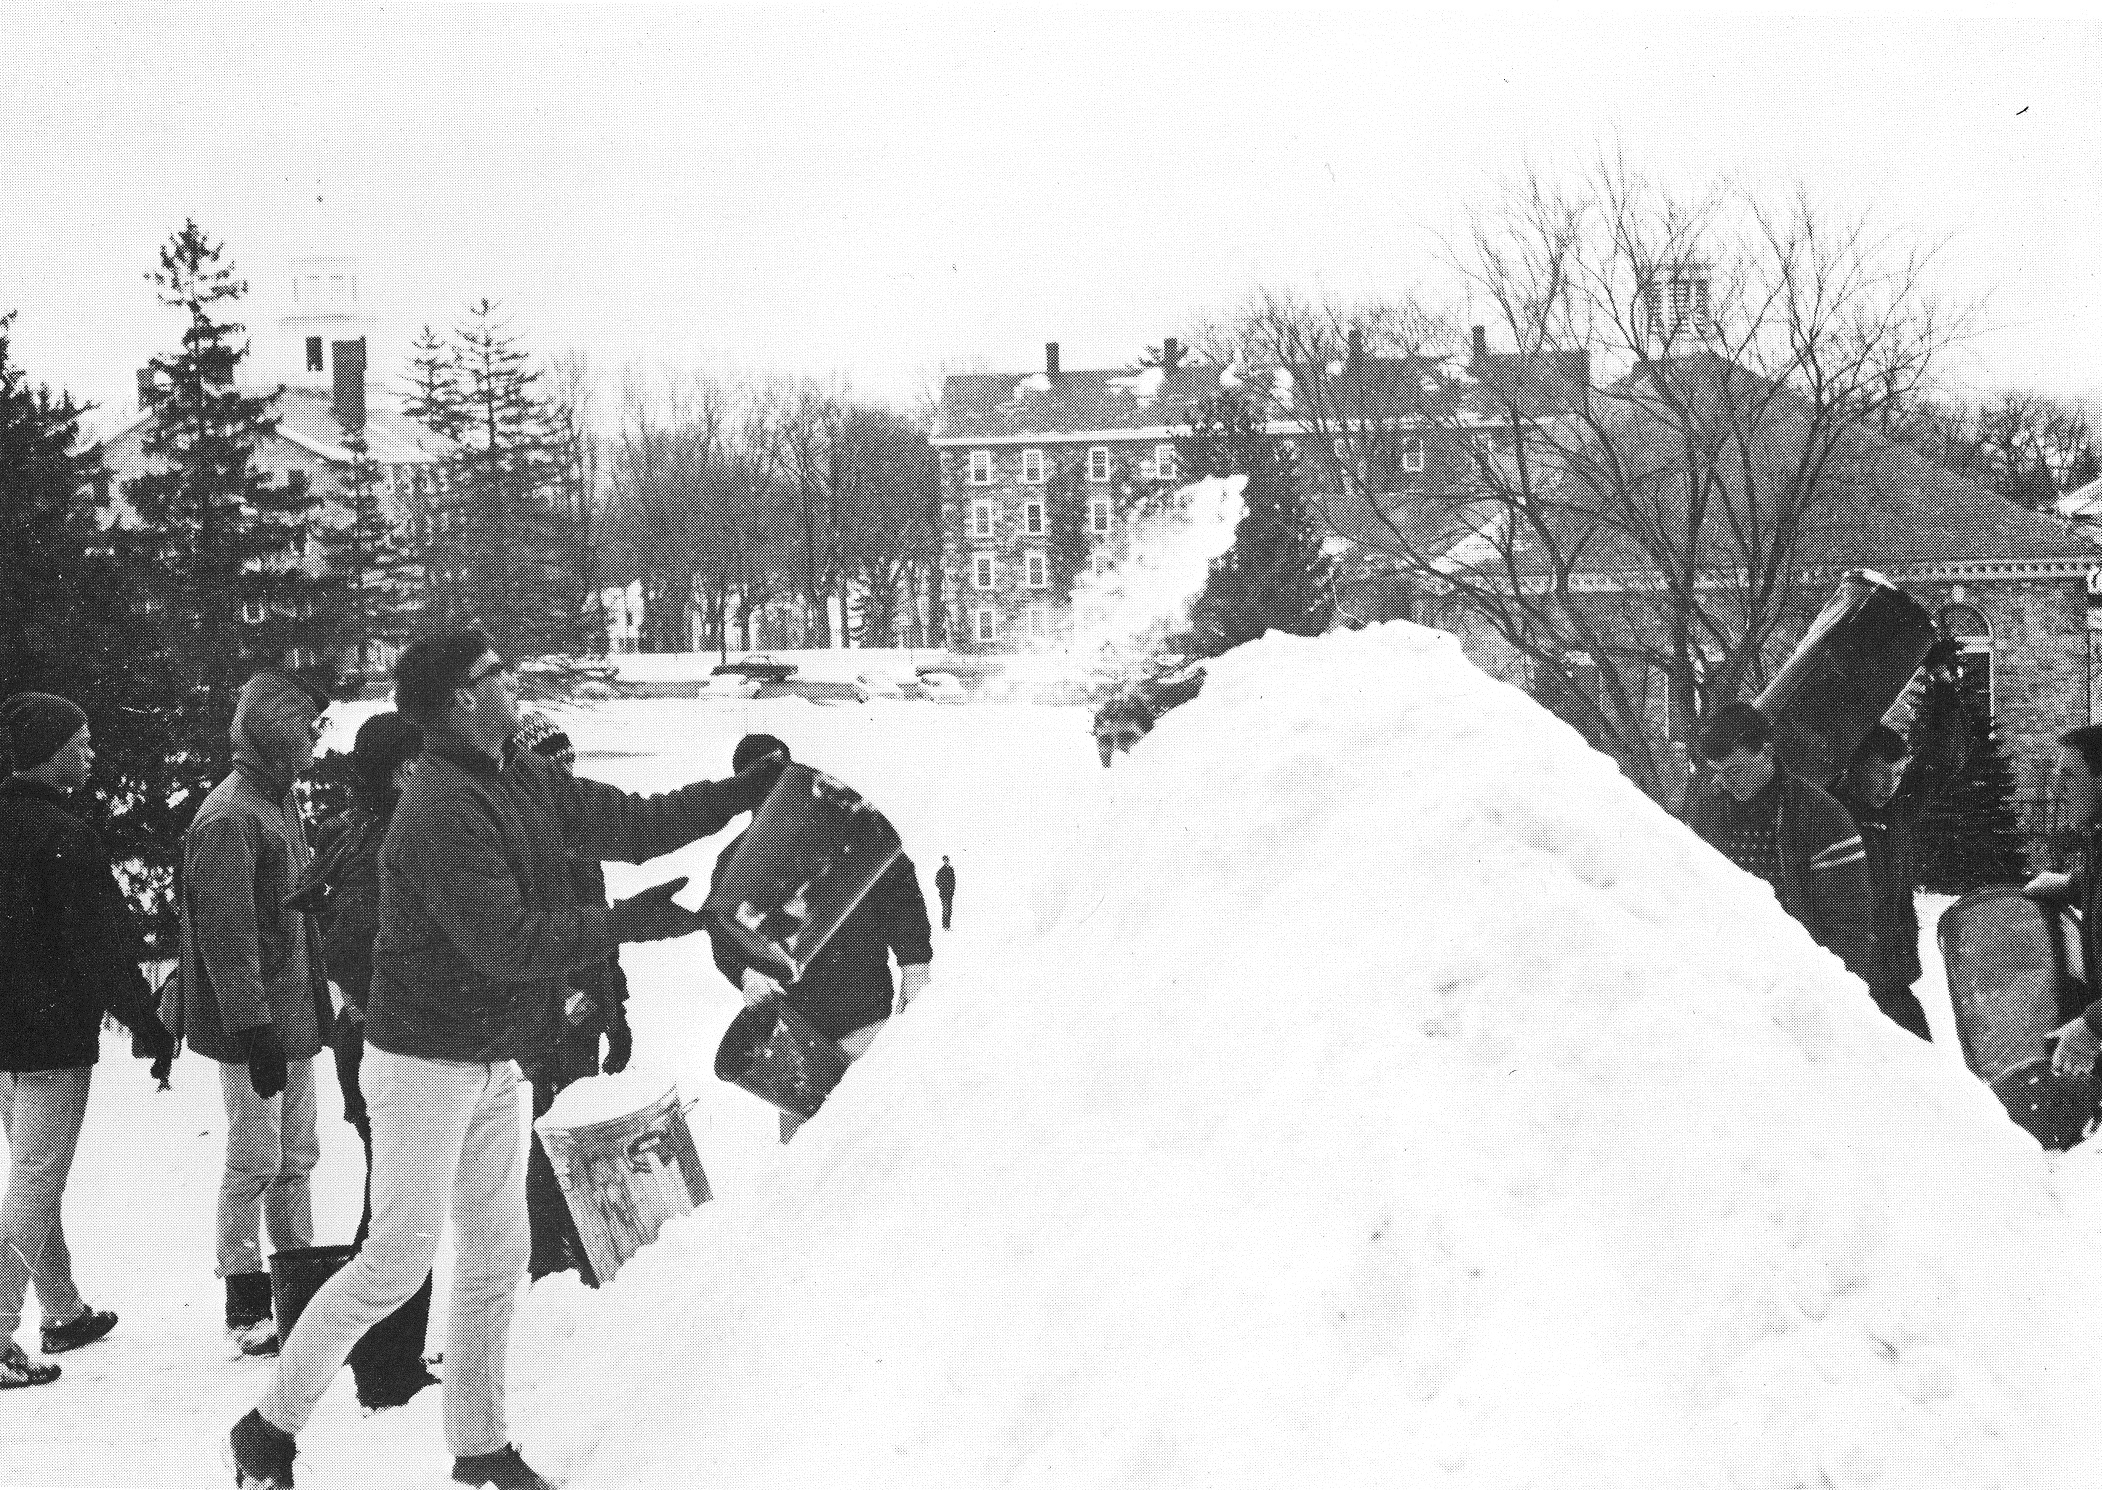 Making a snow pile, 1964